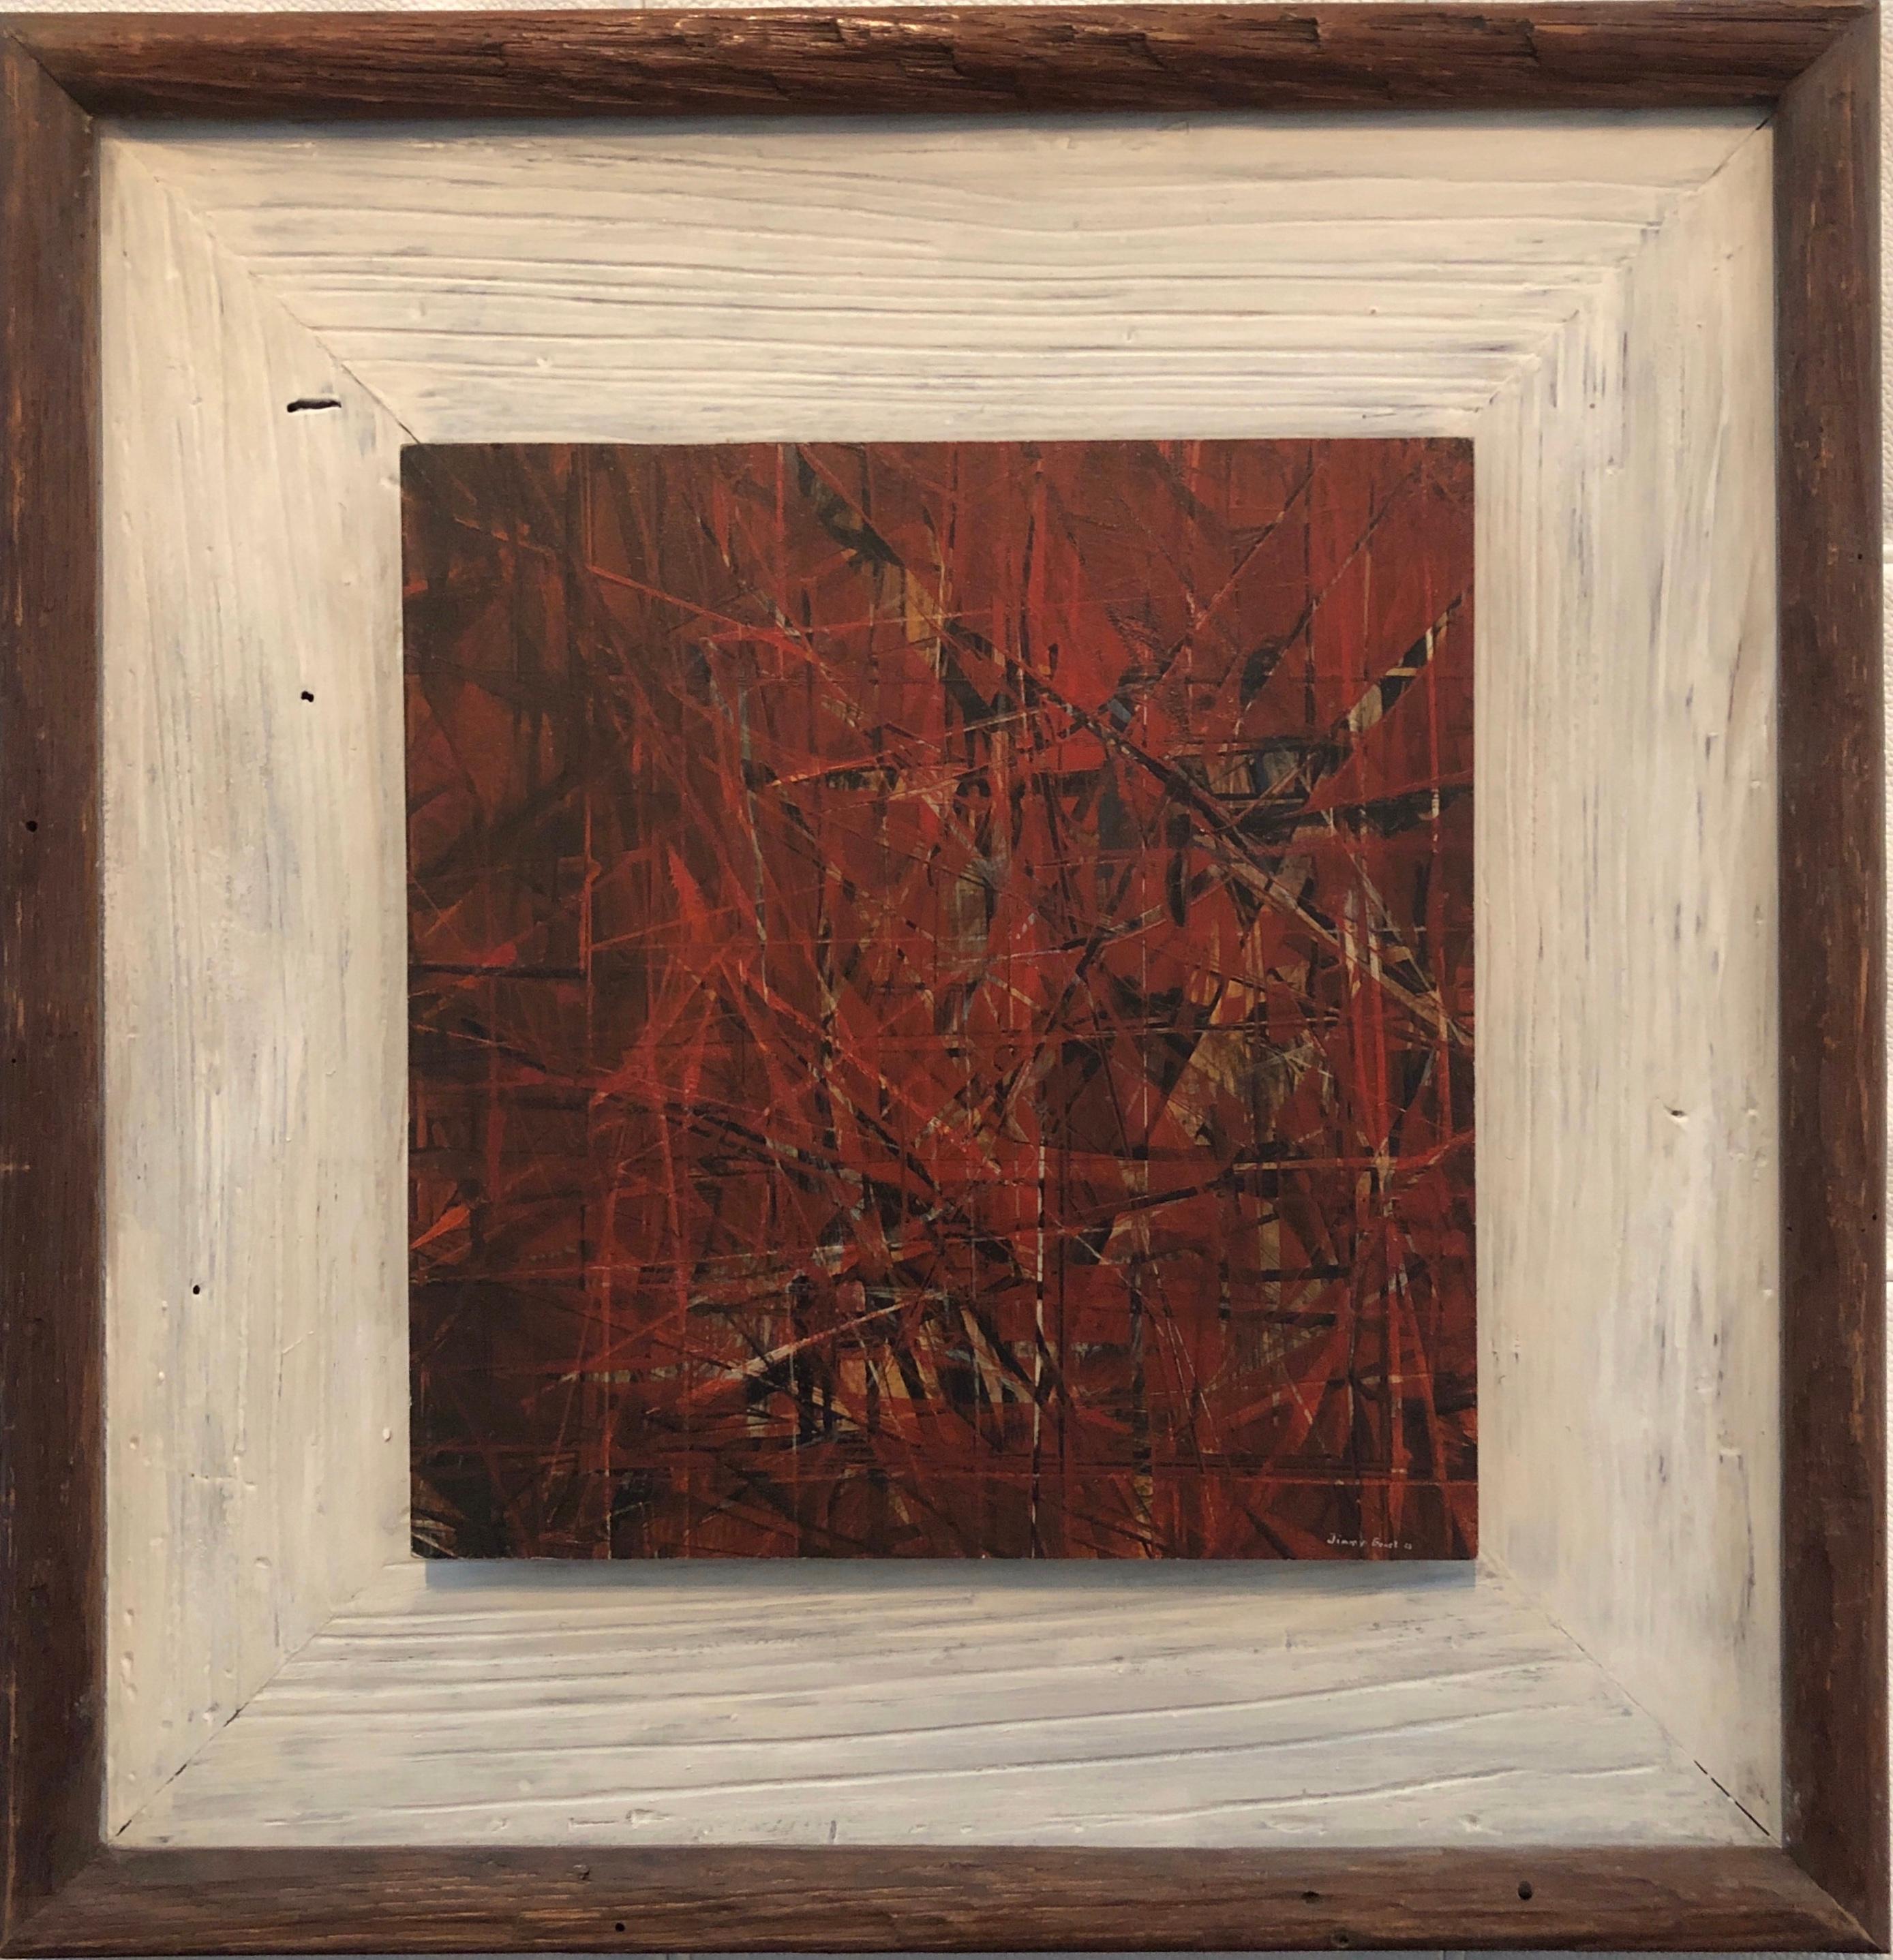 Signed and dated "Jimmy Ernst 63"  lower right. Measurement of artwork is 8 ½" x 8 ¼" and framed 15 ½" x 15" x 1 ¼".

Provenance: Gift from Jimmy Ernst to his personal friend architect John Johansen, New Canaan, CT in 1963. Johansen was a member of